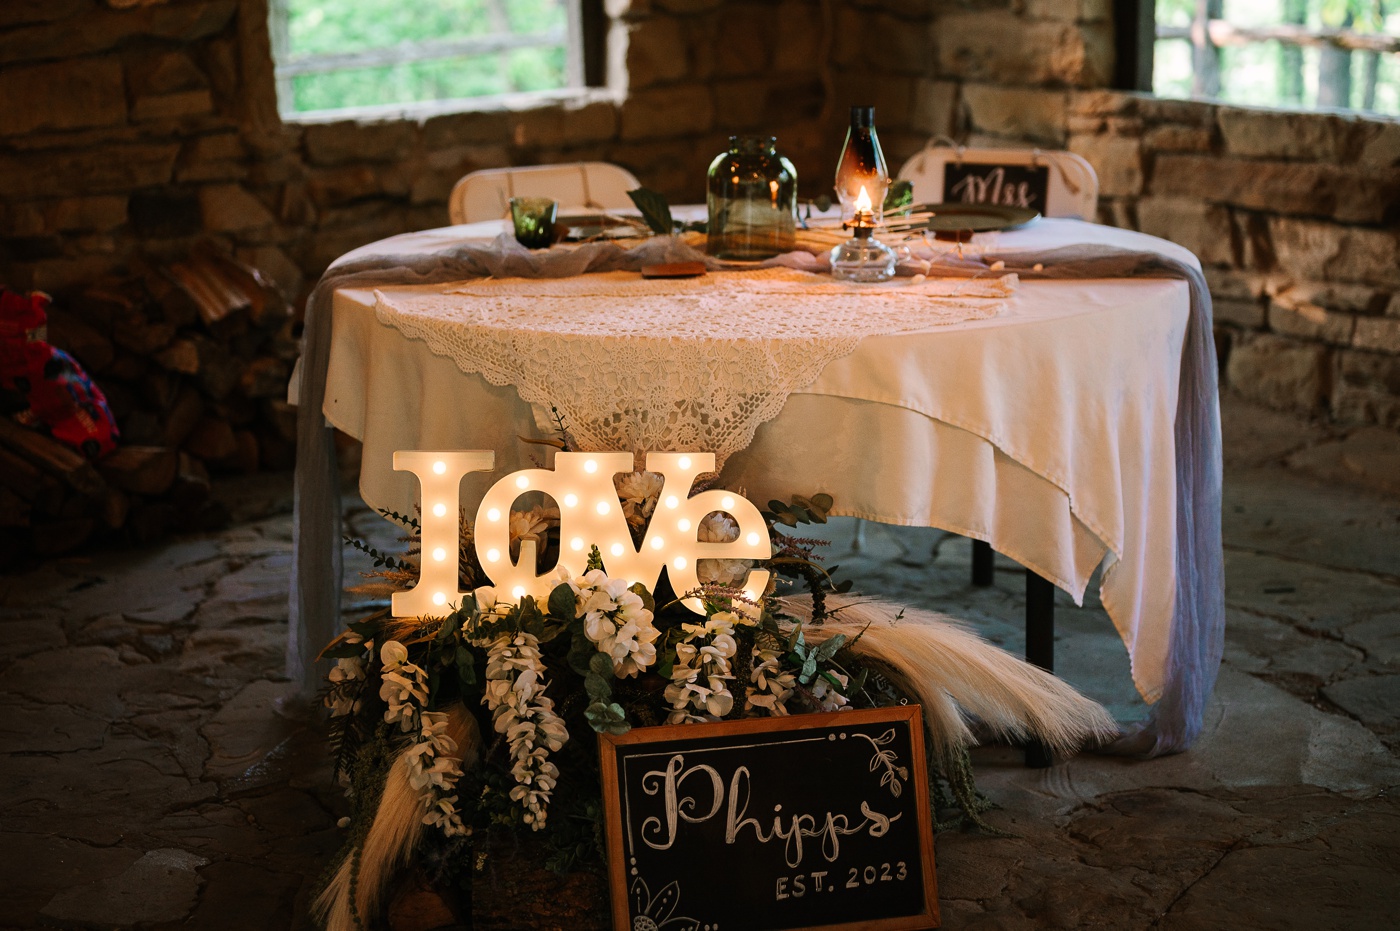 "Love" marquee sign in front of a rustic sweetheart table